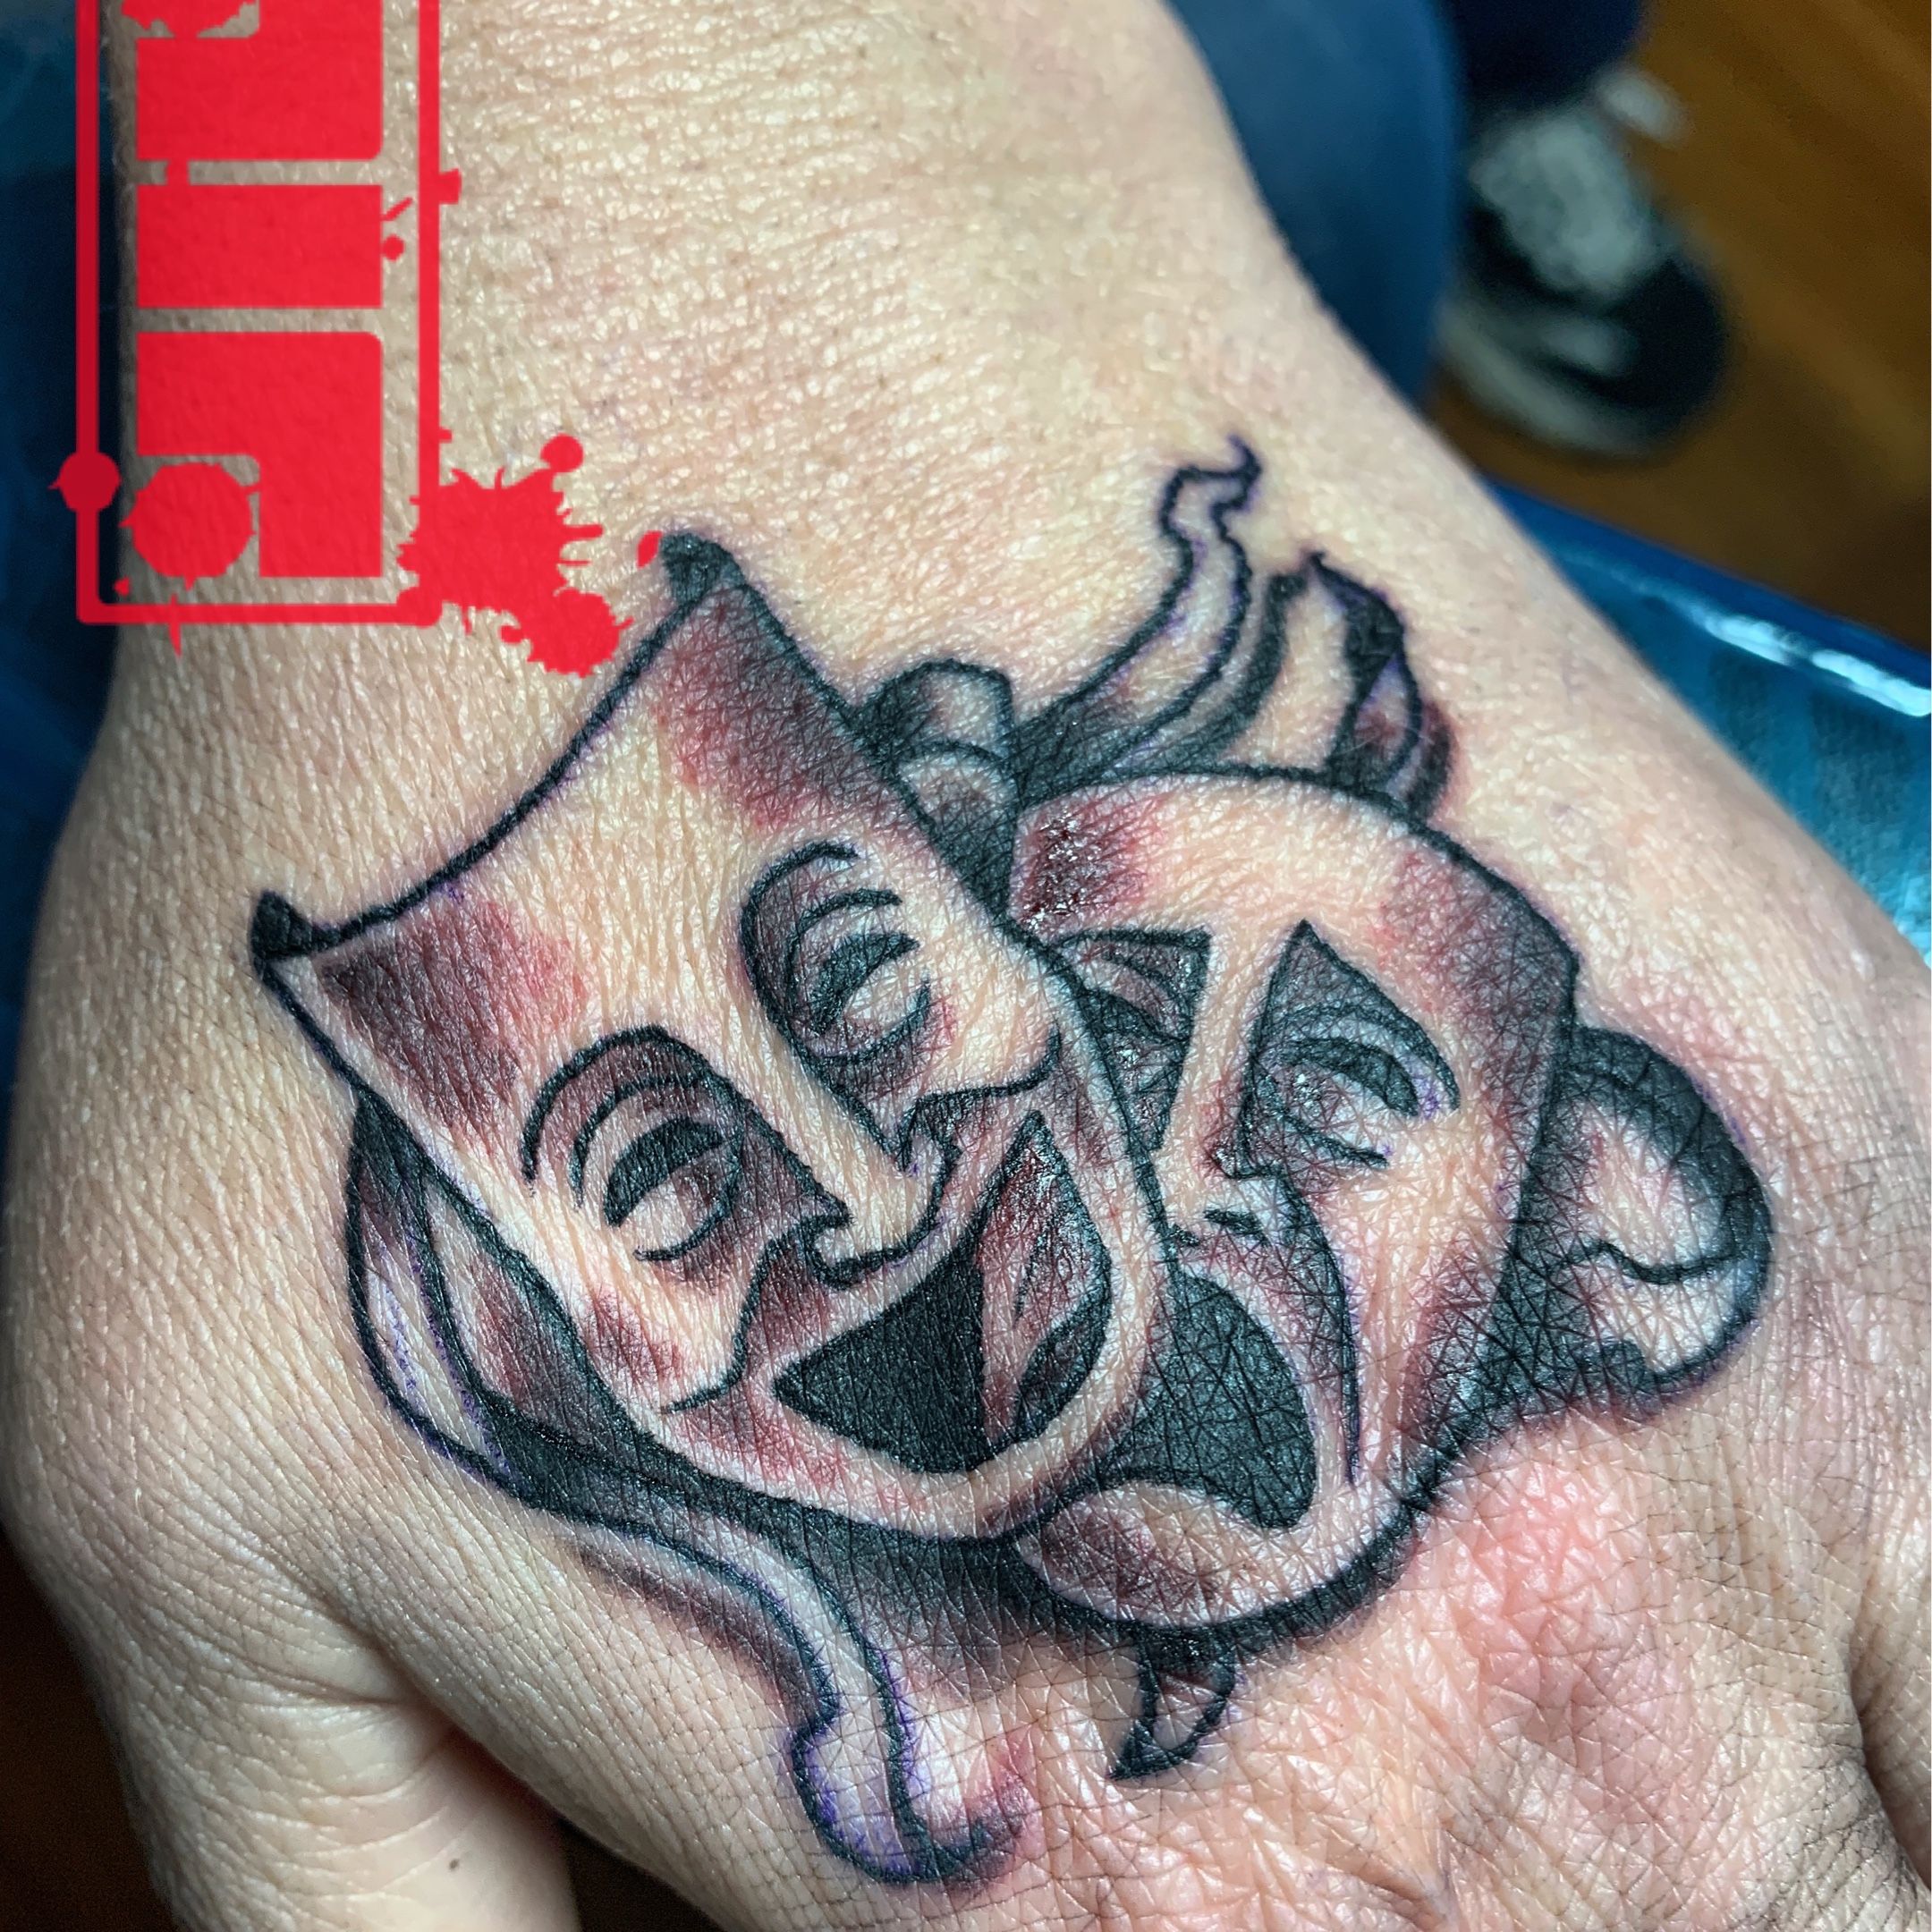 Tattoo uploaded by ByJNCustomsBy Appointment Only  Laugh now cry later  theme for female client handlaughnowcrylatertattoos handtattoos  byjncustoms  Tattoodo